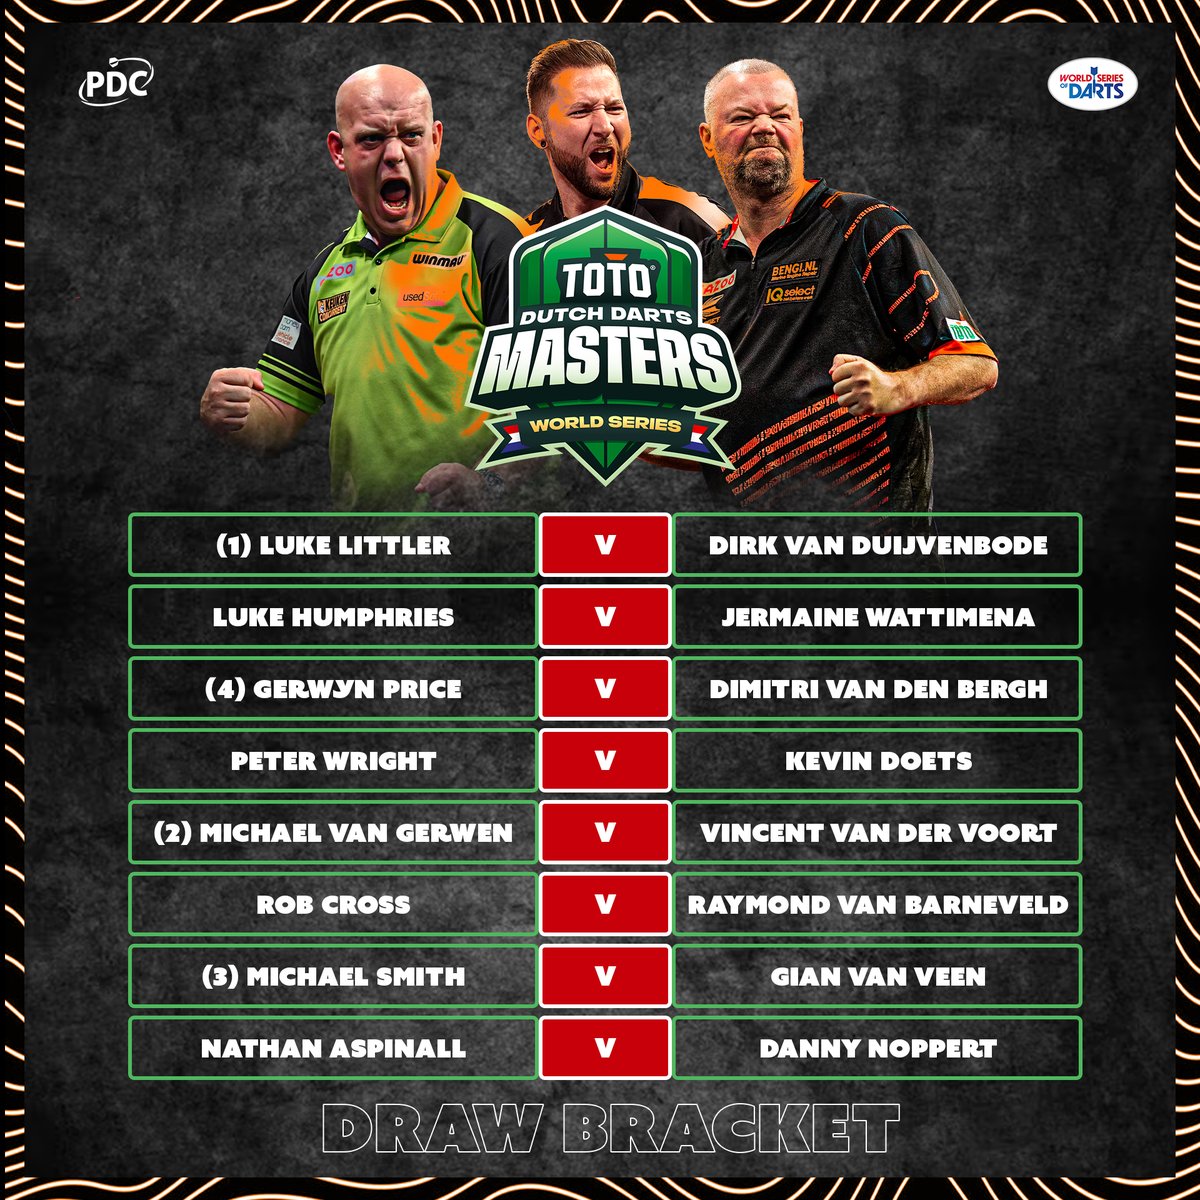 Draw Bracket 🔢 The 2024 Toto Dutch Darts Masters gets underway tomorrow in Den Bosch. Here's how the Draw Bracket shapes up 👇